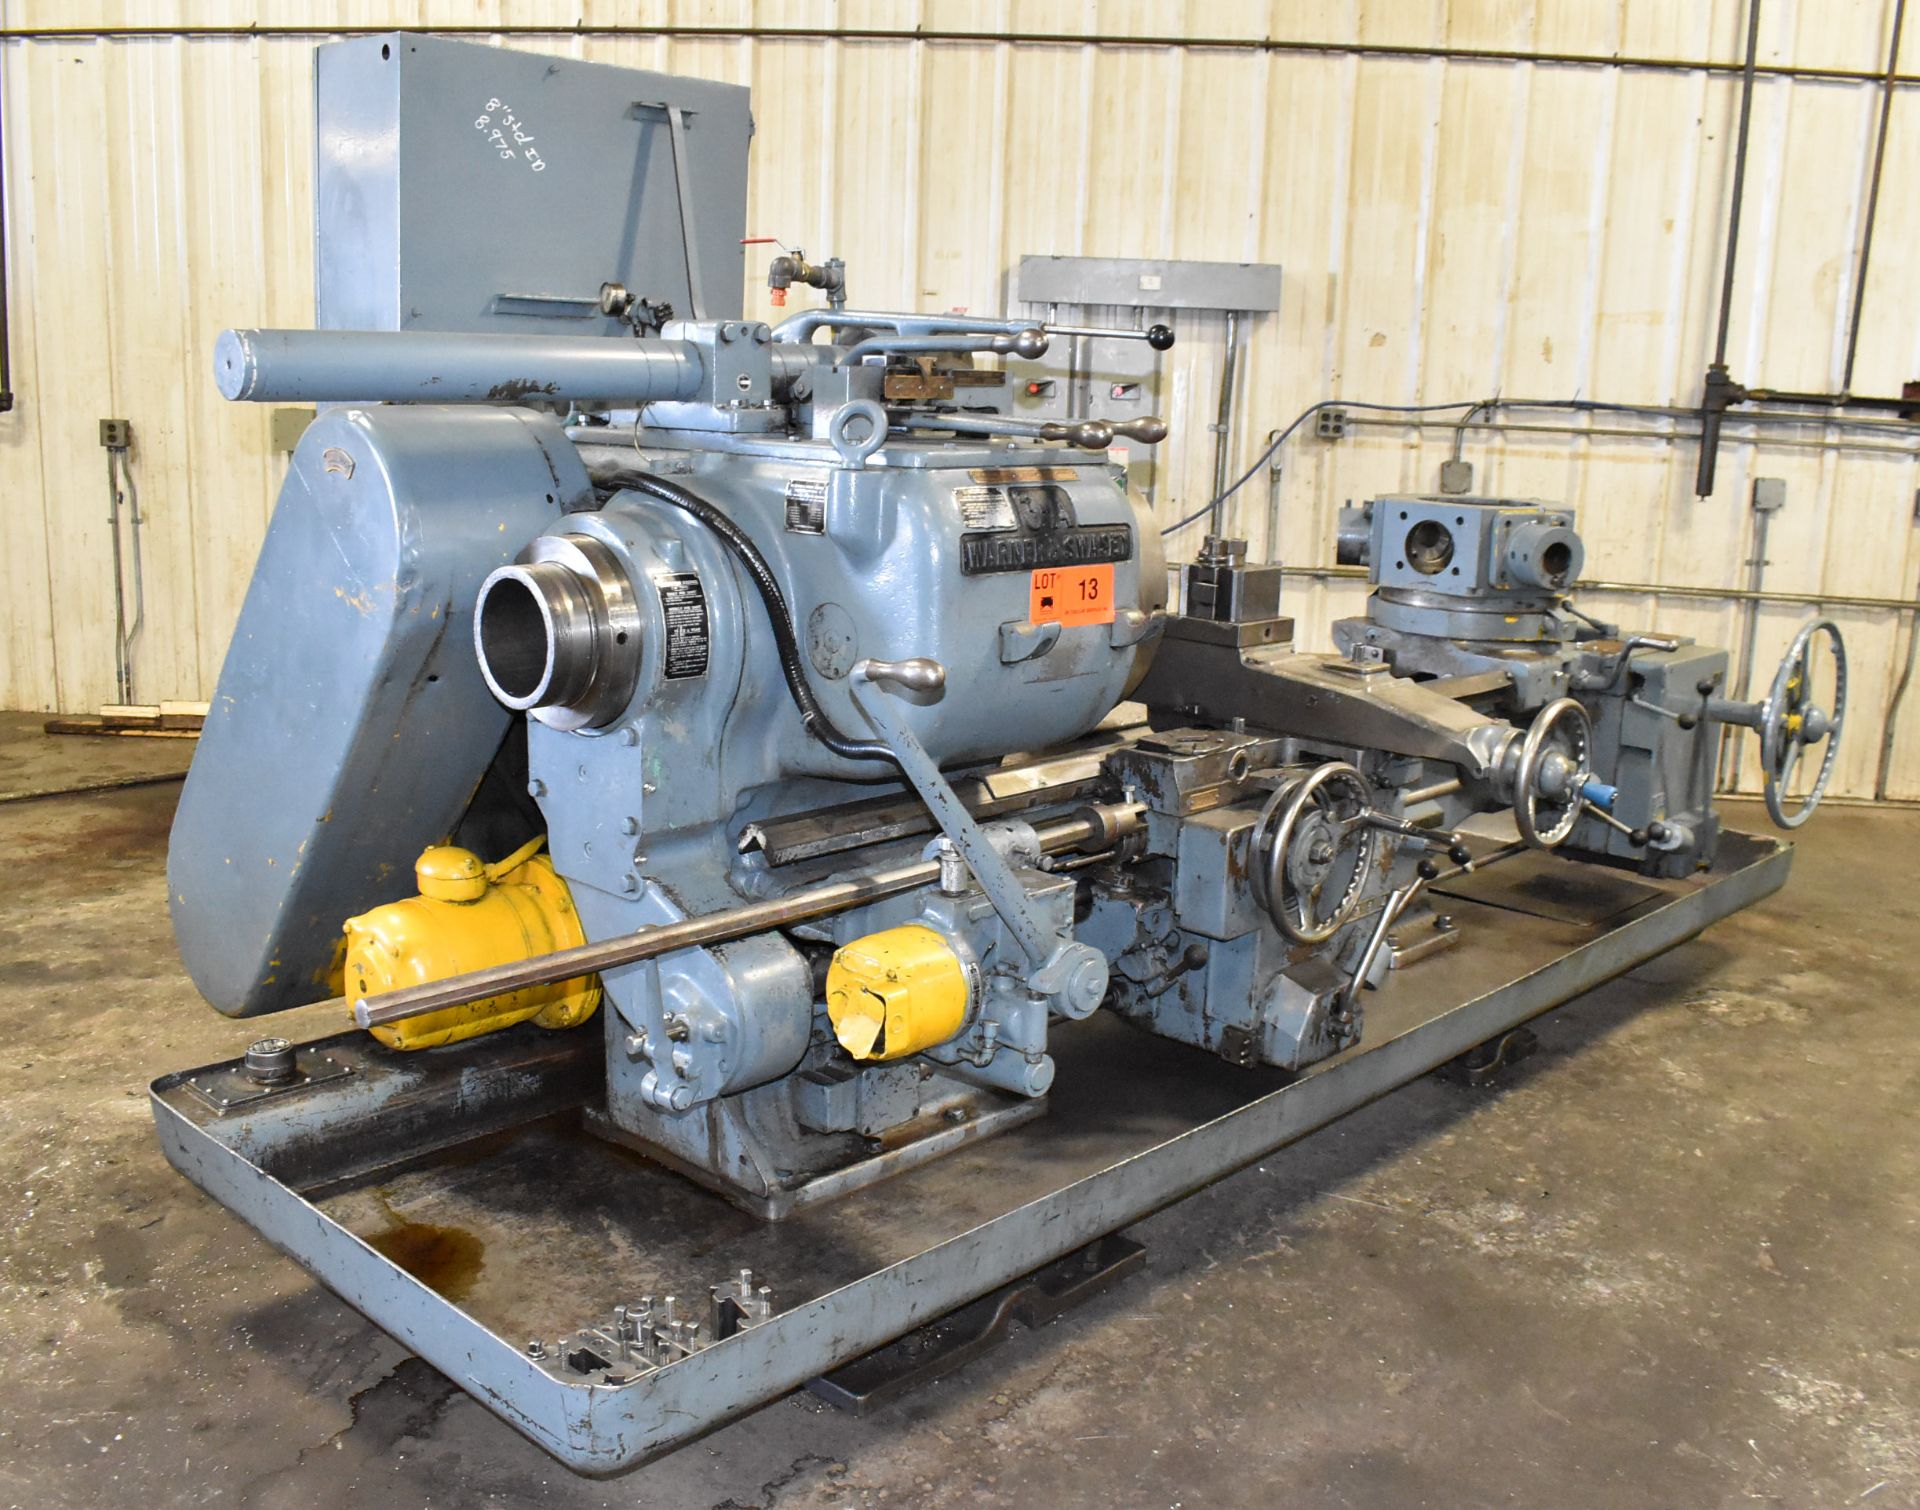 WARNER & SWASEY 3A TURRET LATHE WITH 24" SWING OVER BED, 52" DISTANCE BETWEEN CENTERS, 6.25" SPINDLE - Image 9 of 9